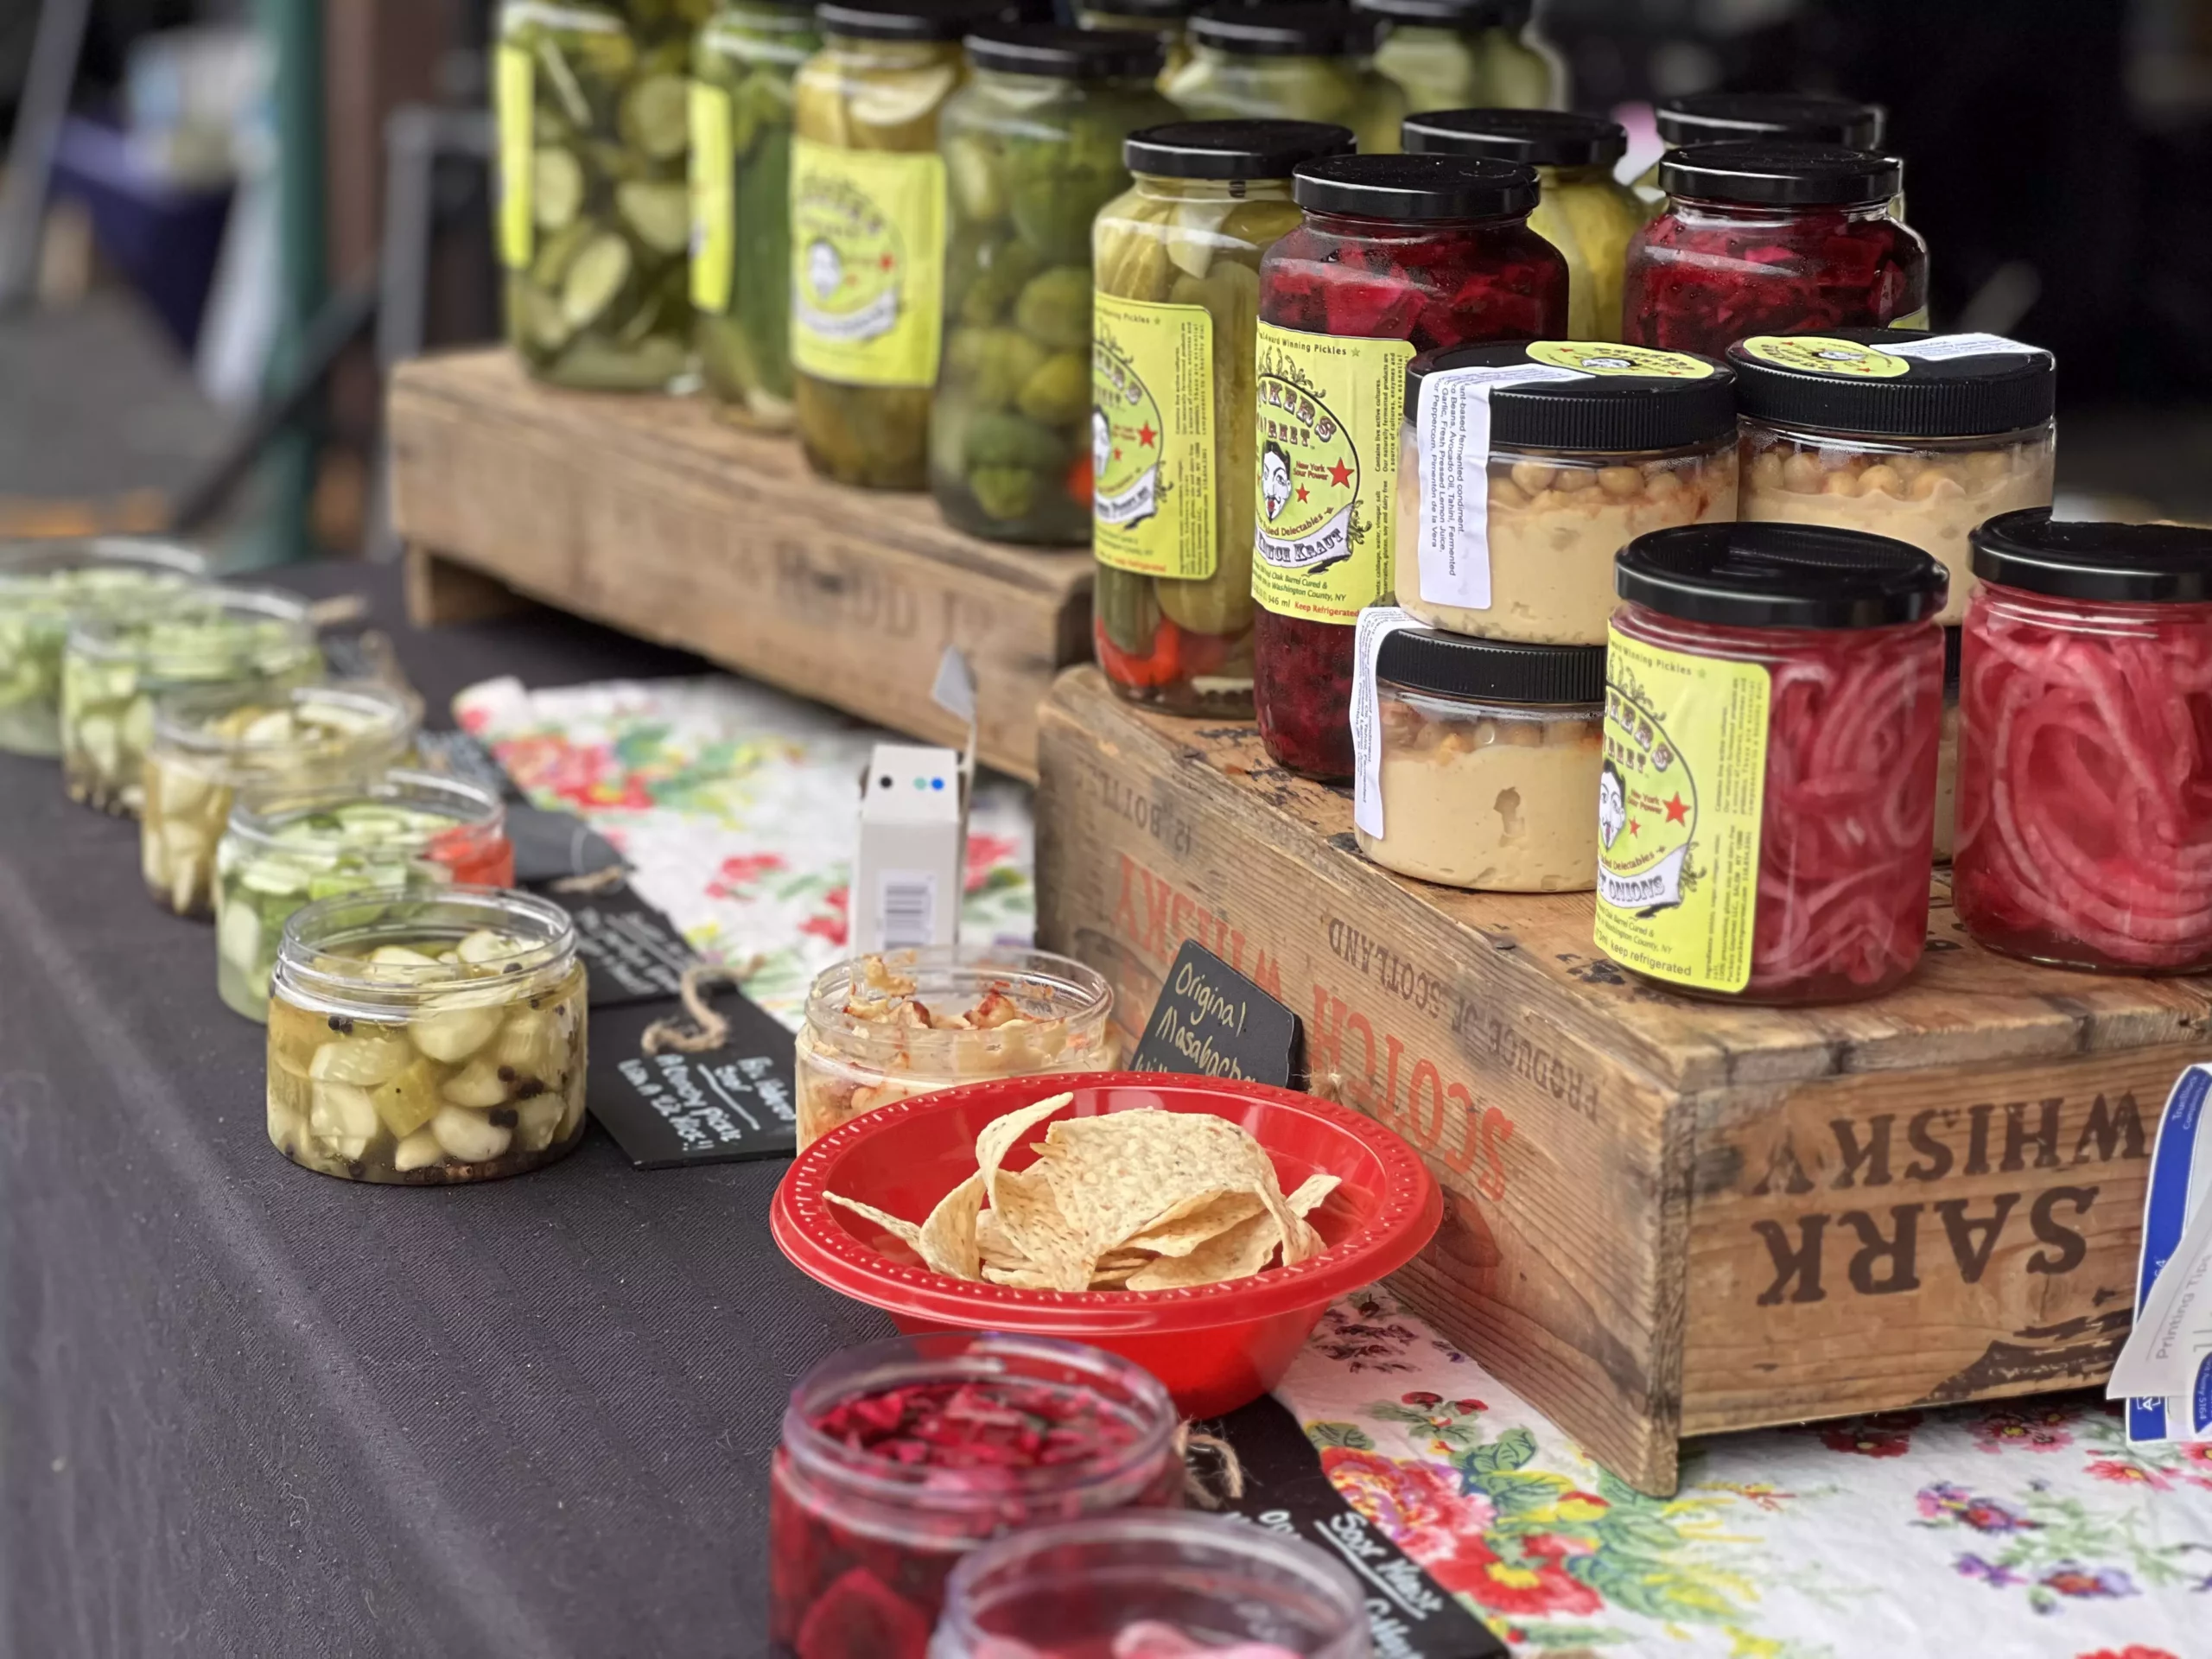 Assorted pickled goods displayed at a market stall.